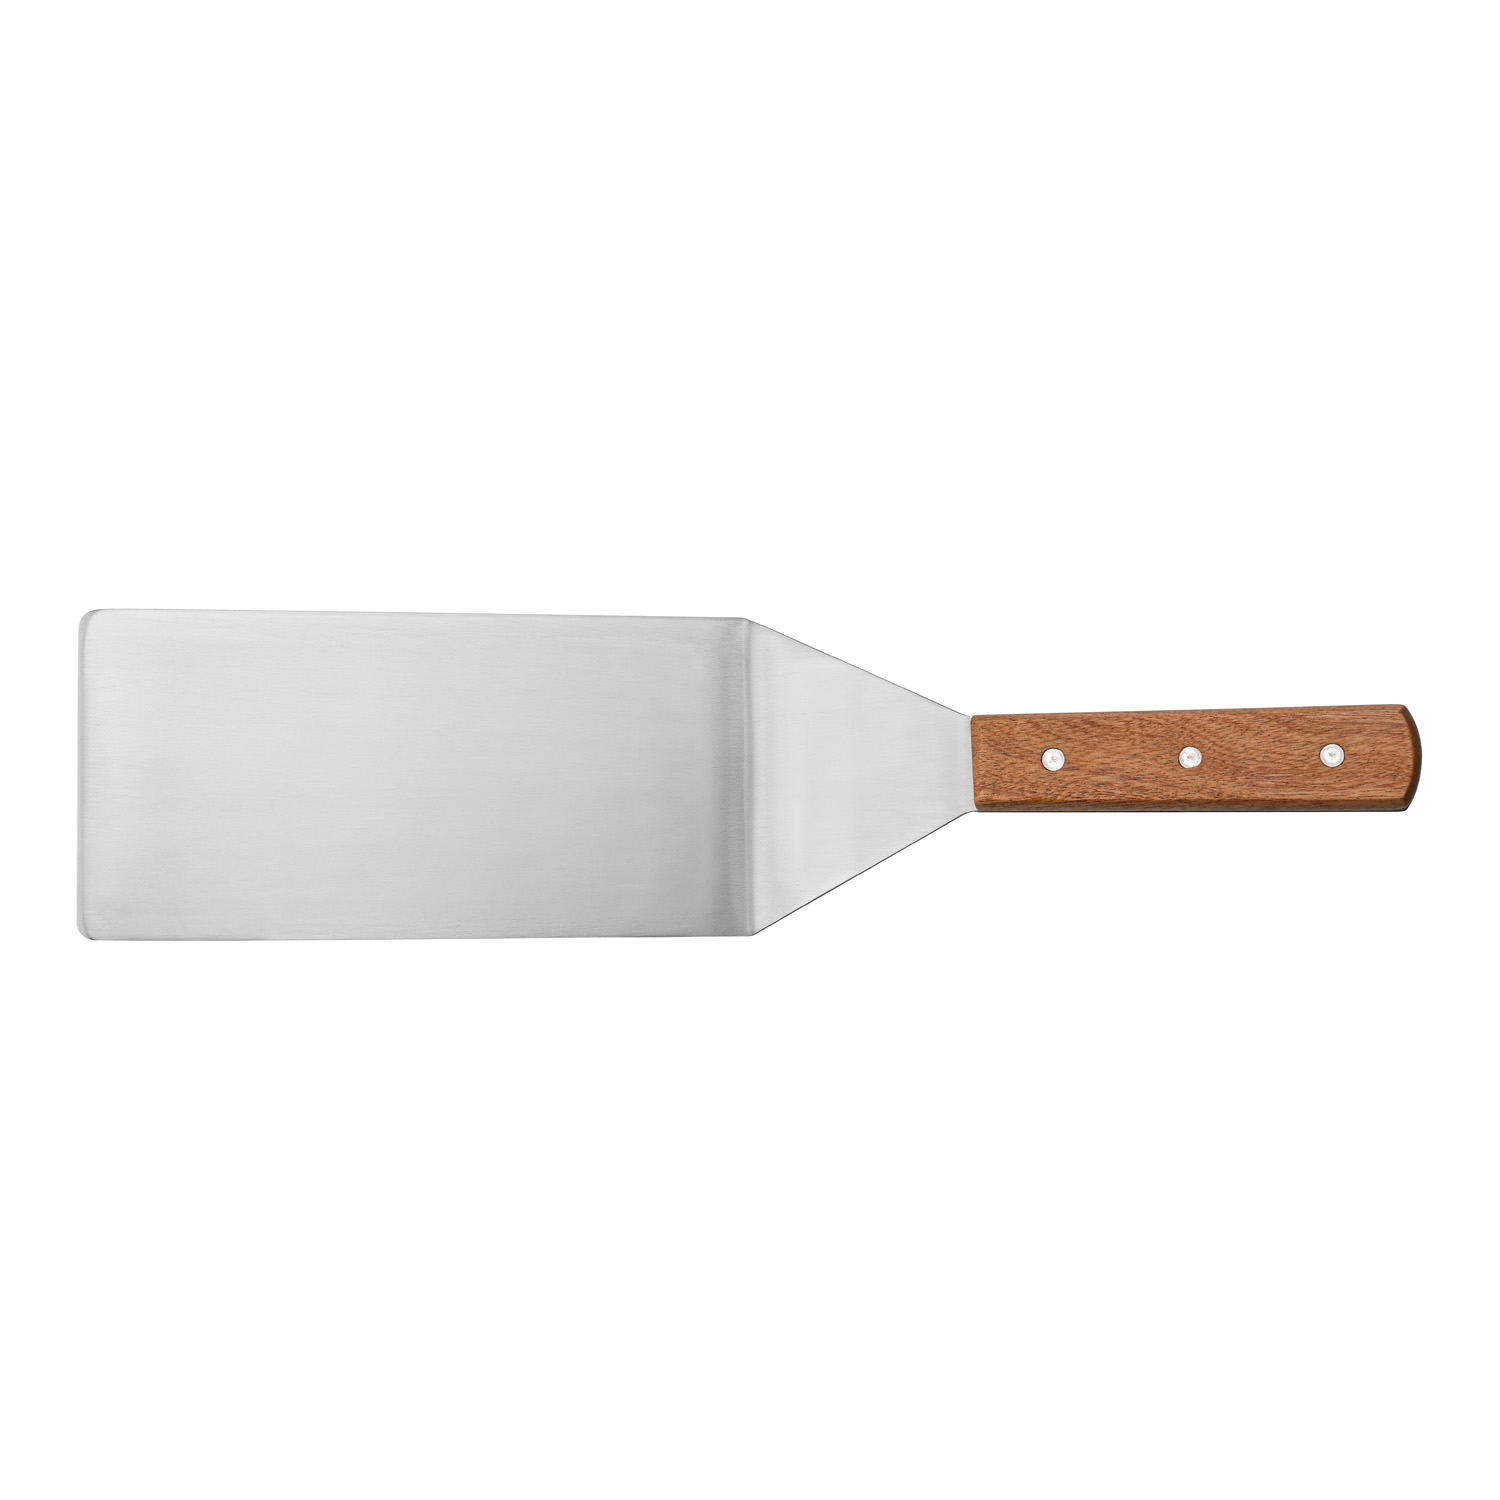 CAC China TNRW-ST84 Stainless Steel Steak Turner with Wood Handle 8"